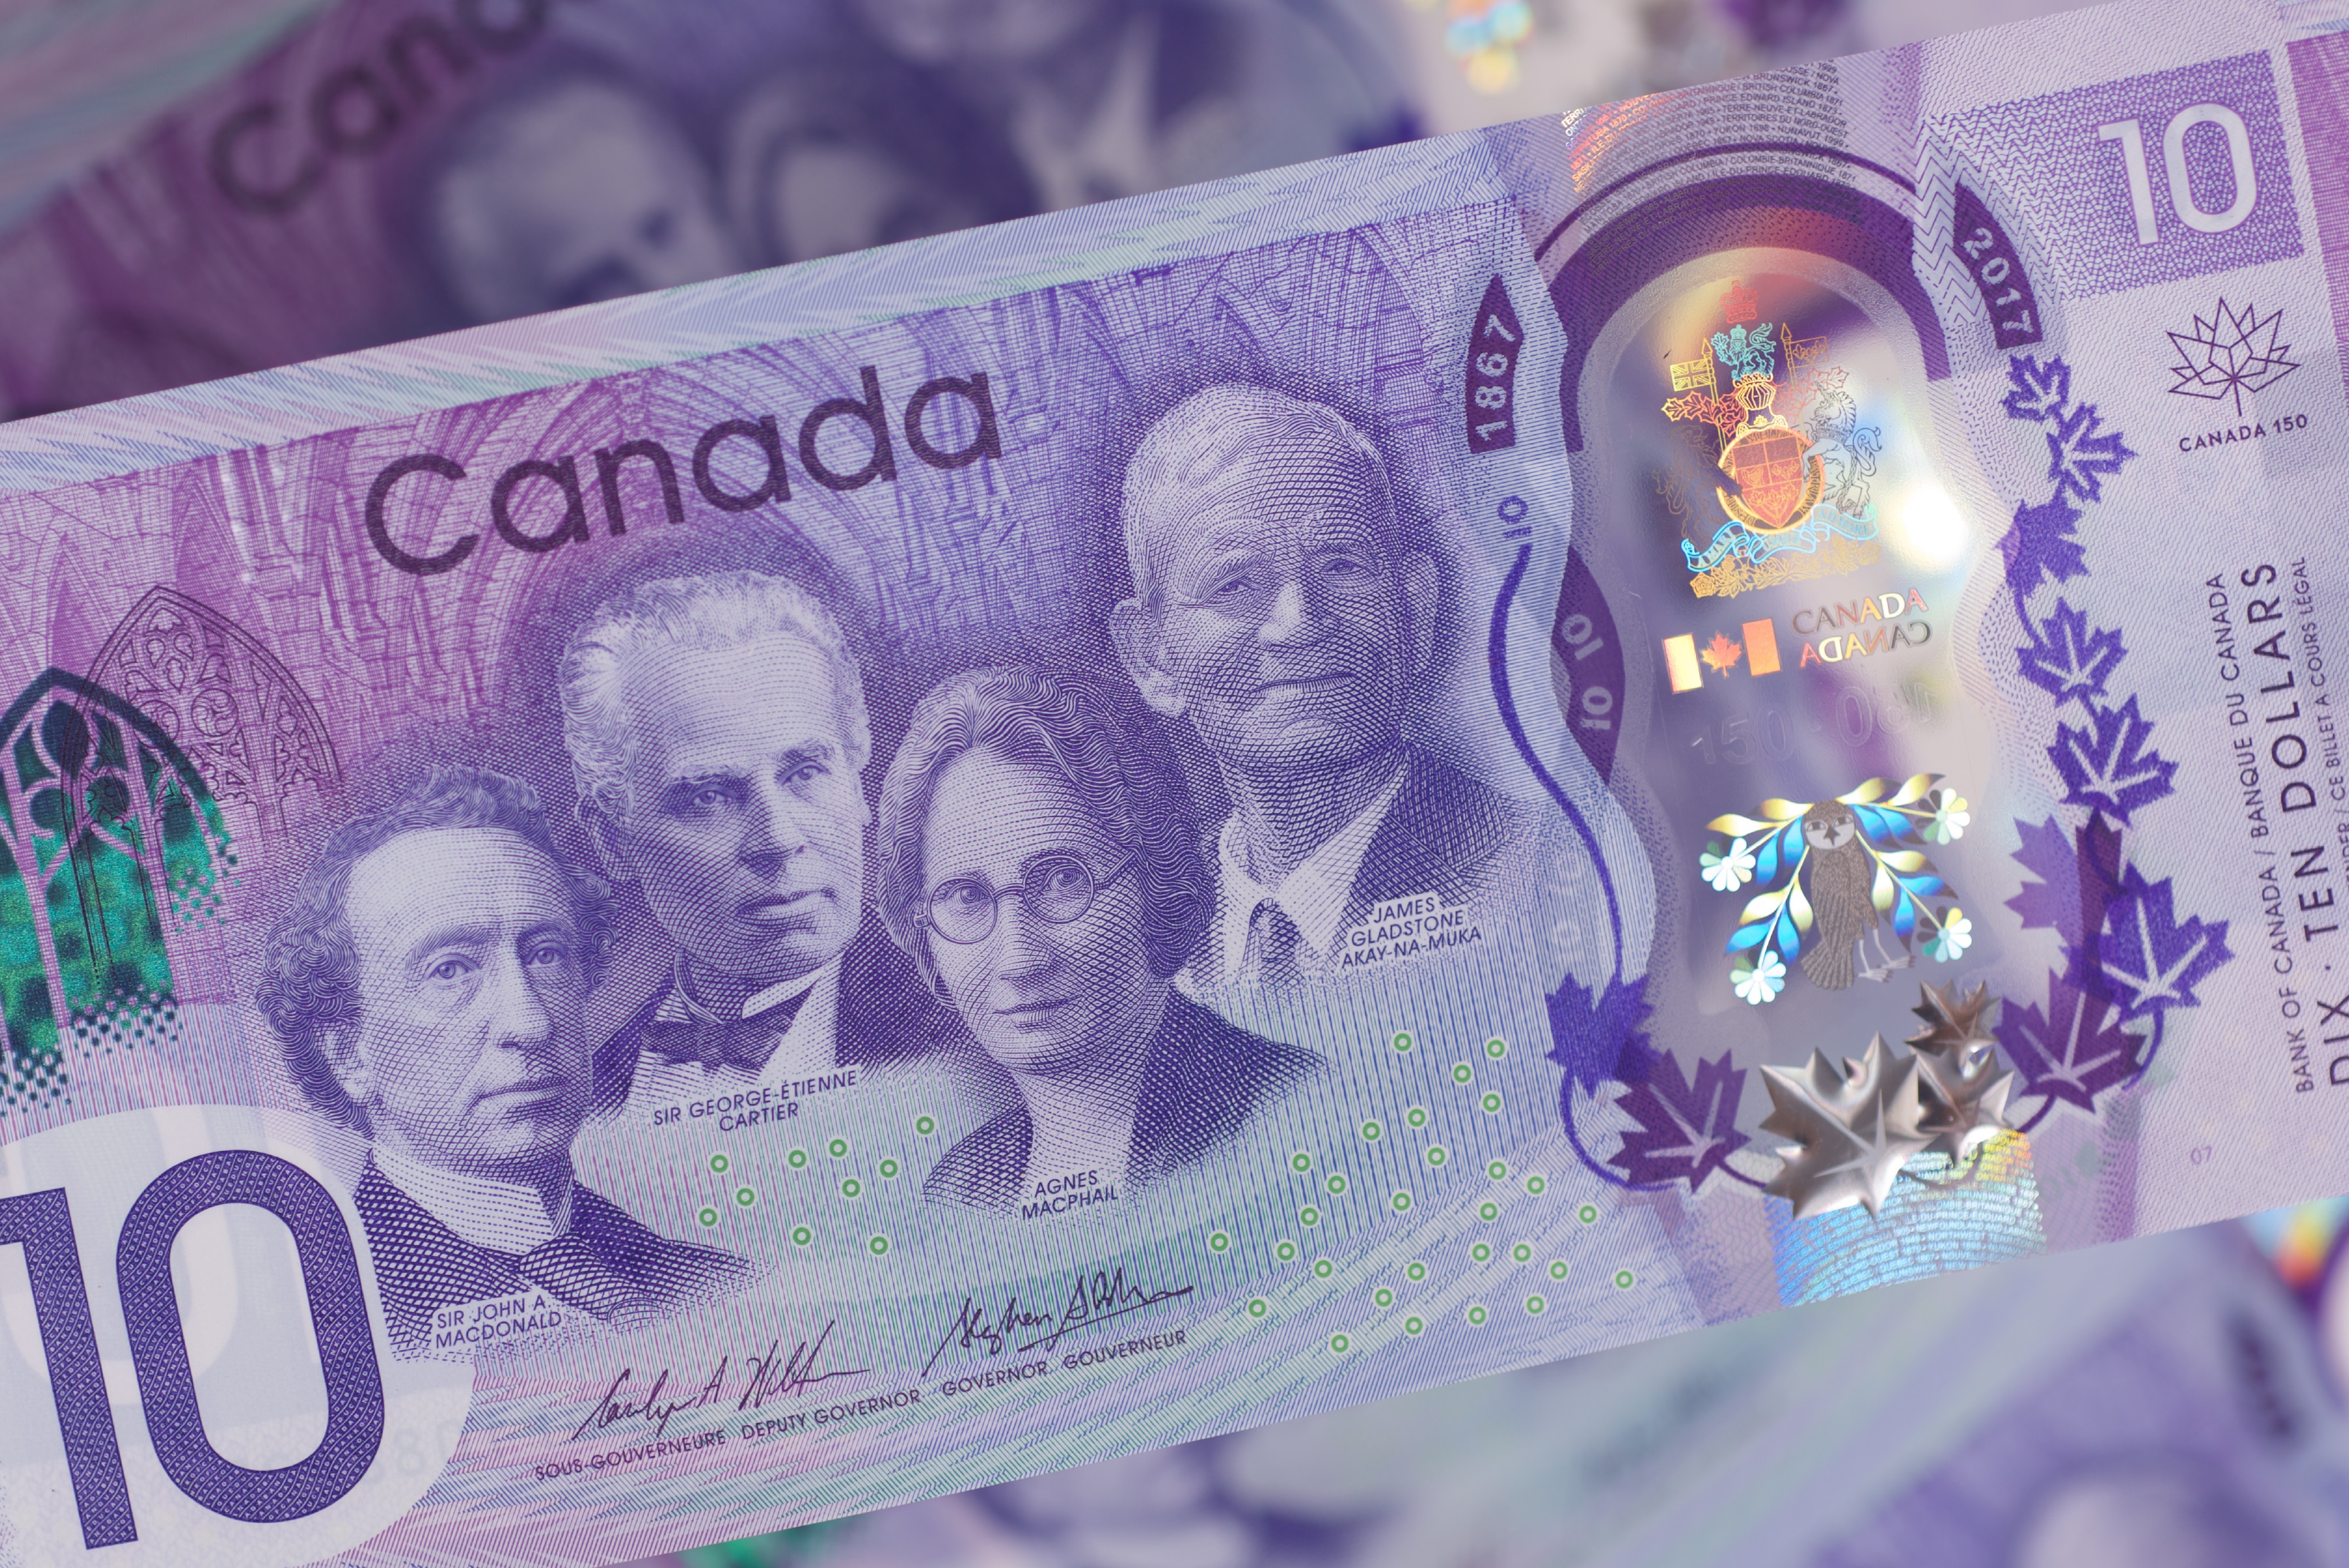 This $10 bill, issued in 2017 to commemorate Canada 150, features Sir John A. Macdonald, Sir George-Étienne Cartier, Agnes Macphail and James Gladstone “Akay-na-muka.”